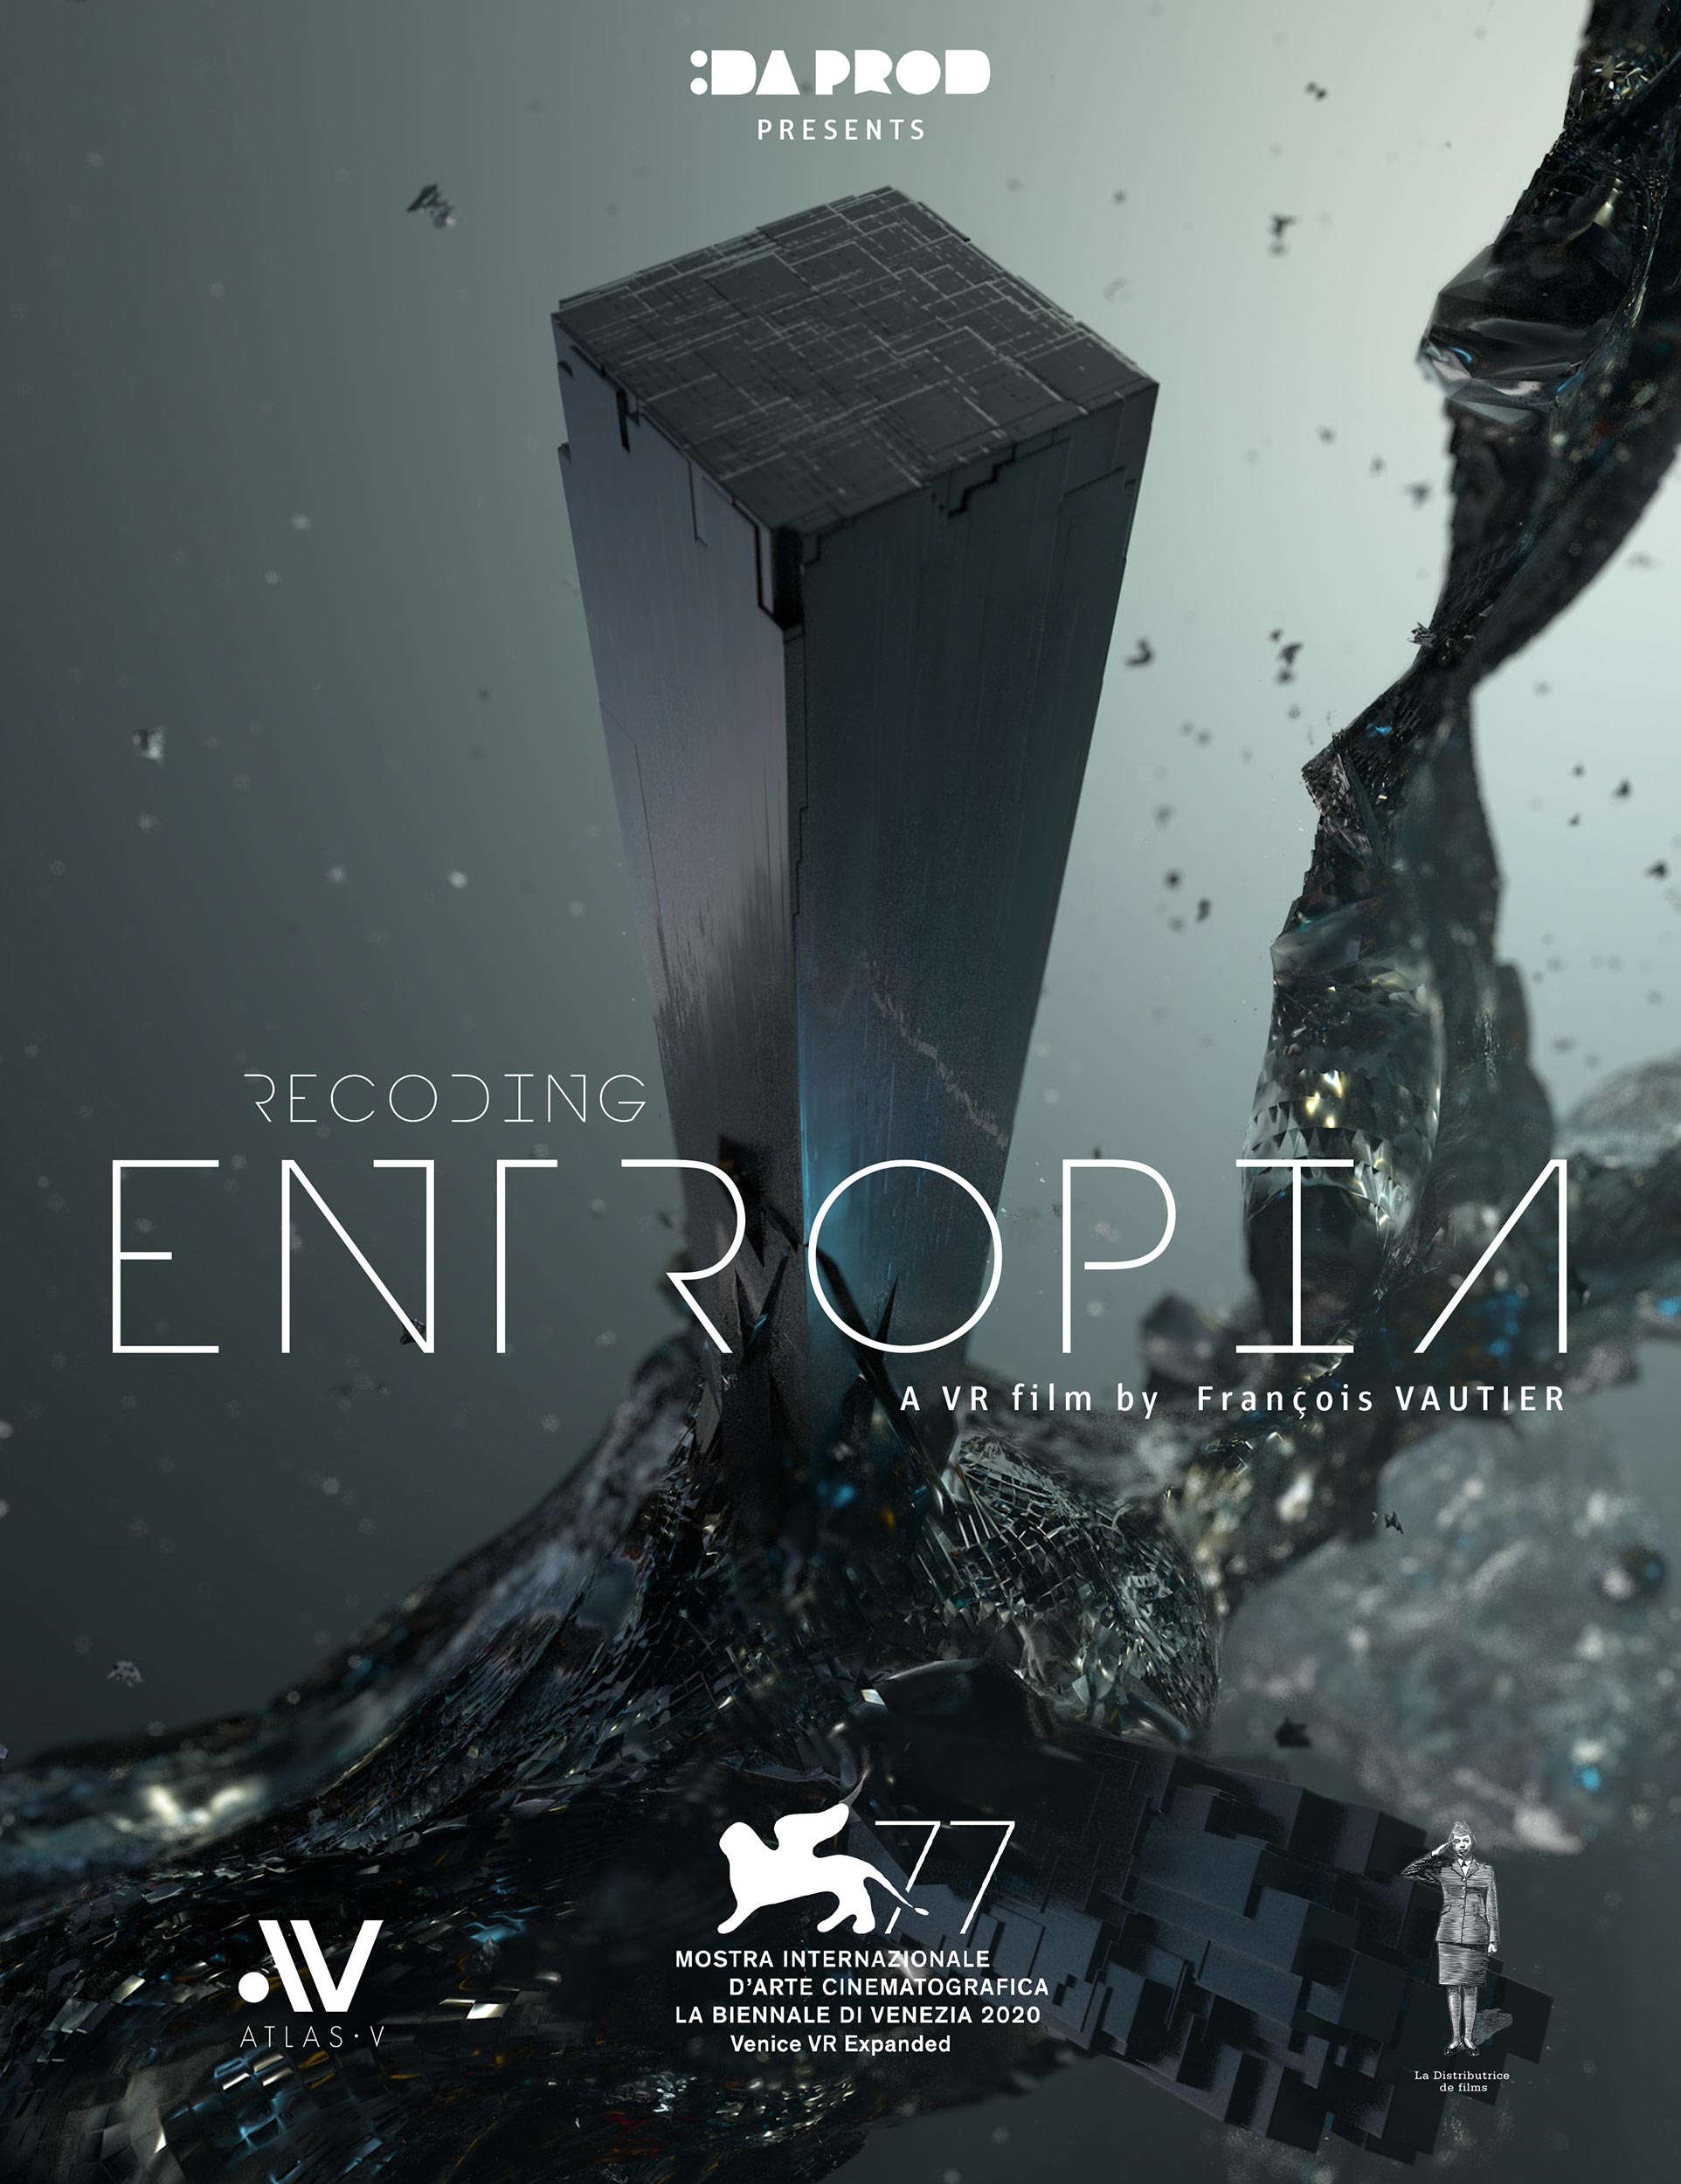 Recoding Entropia, a visual journey in VR